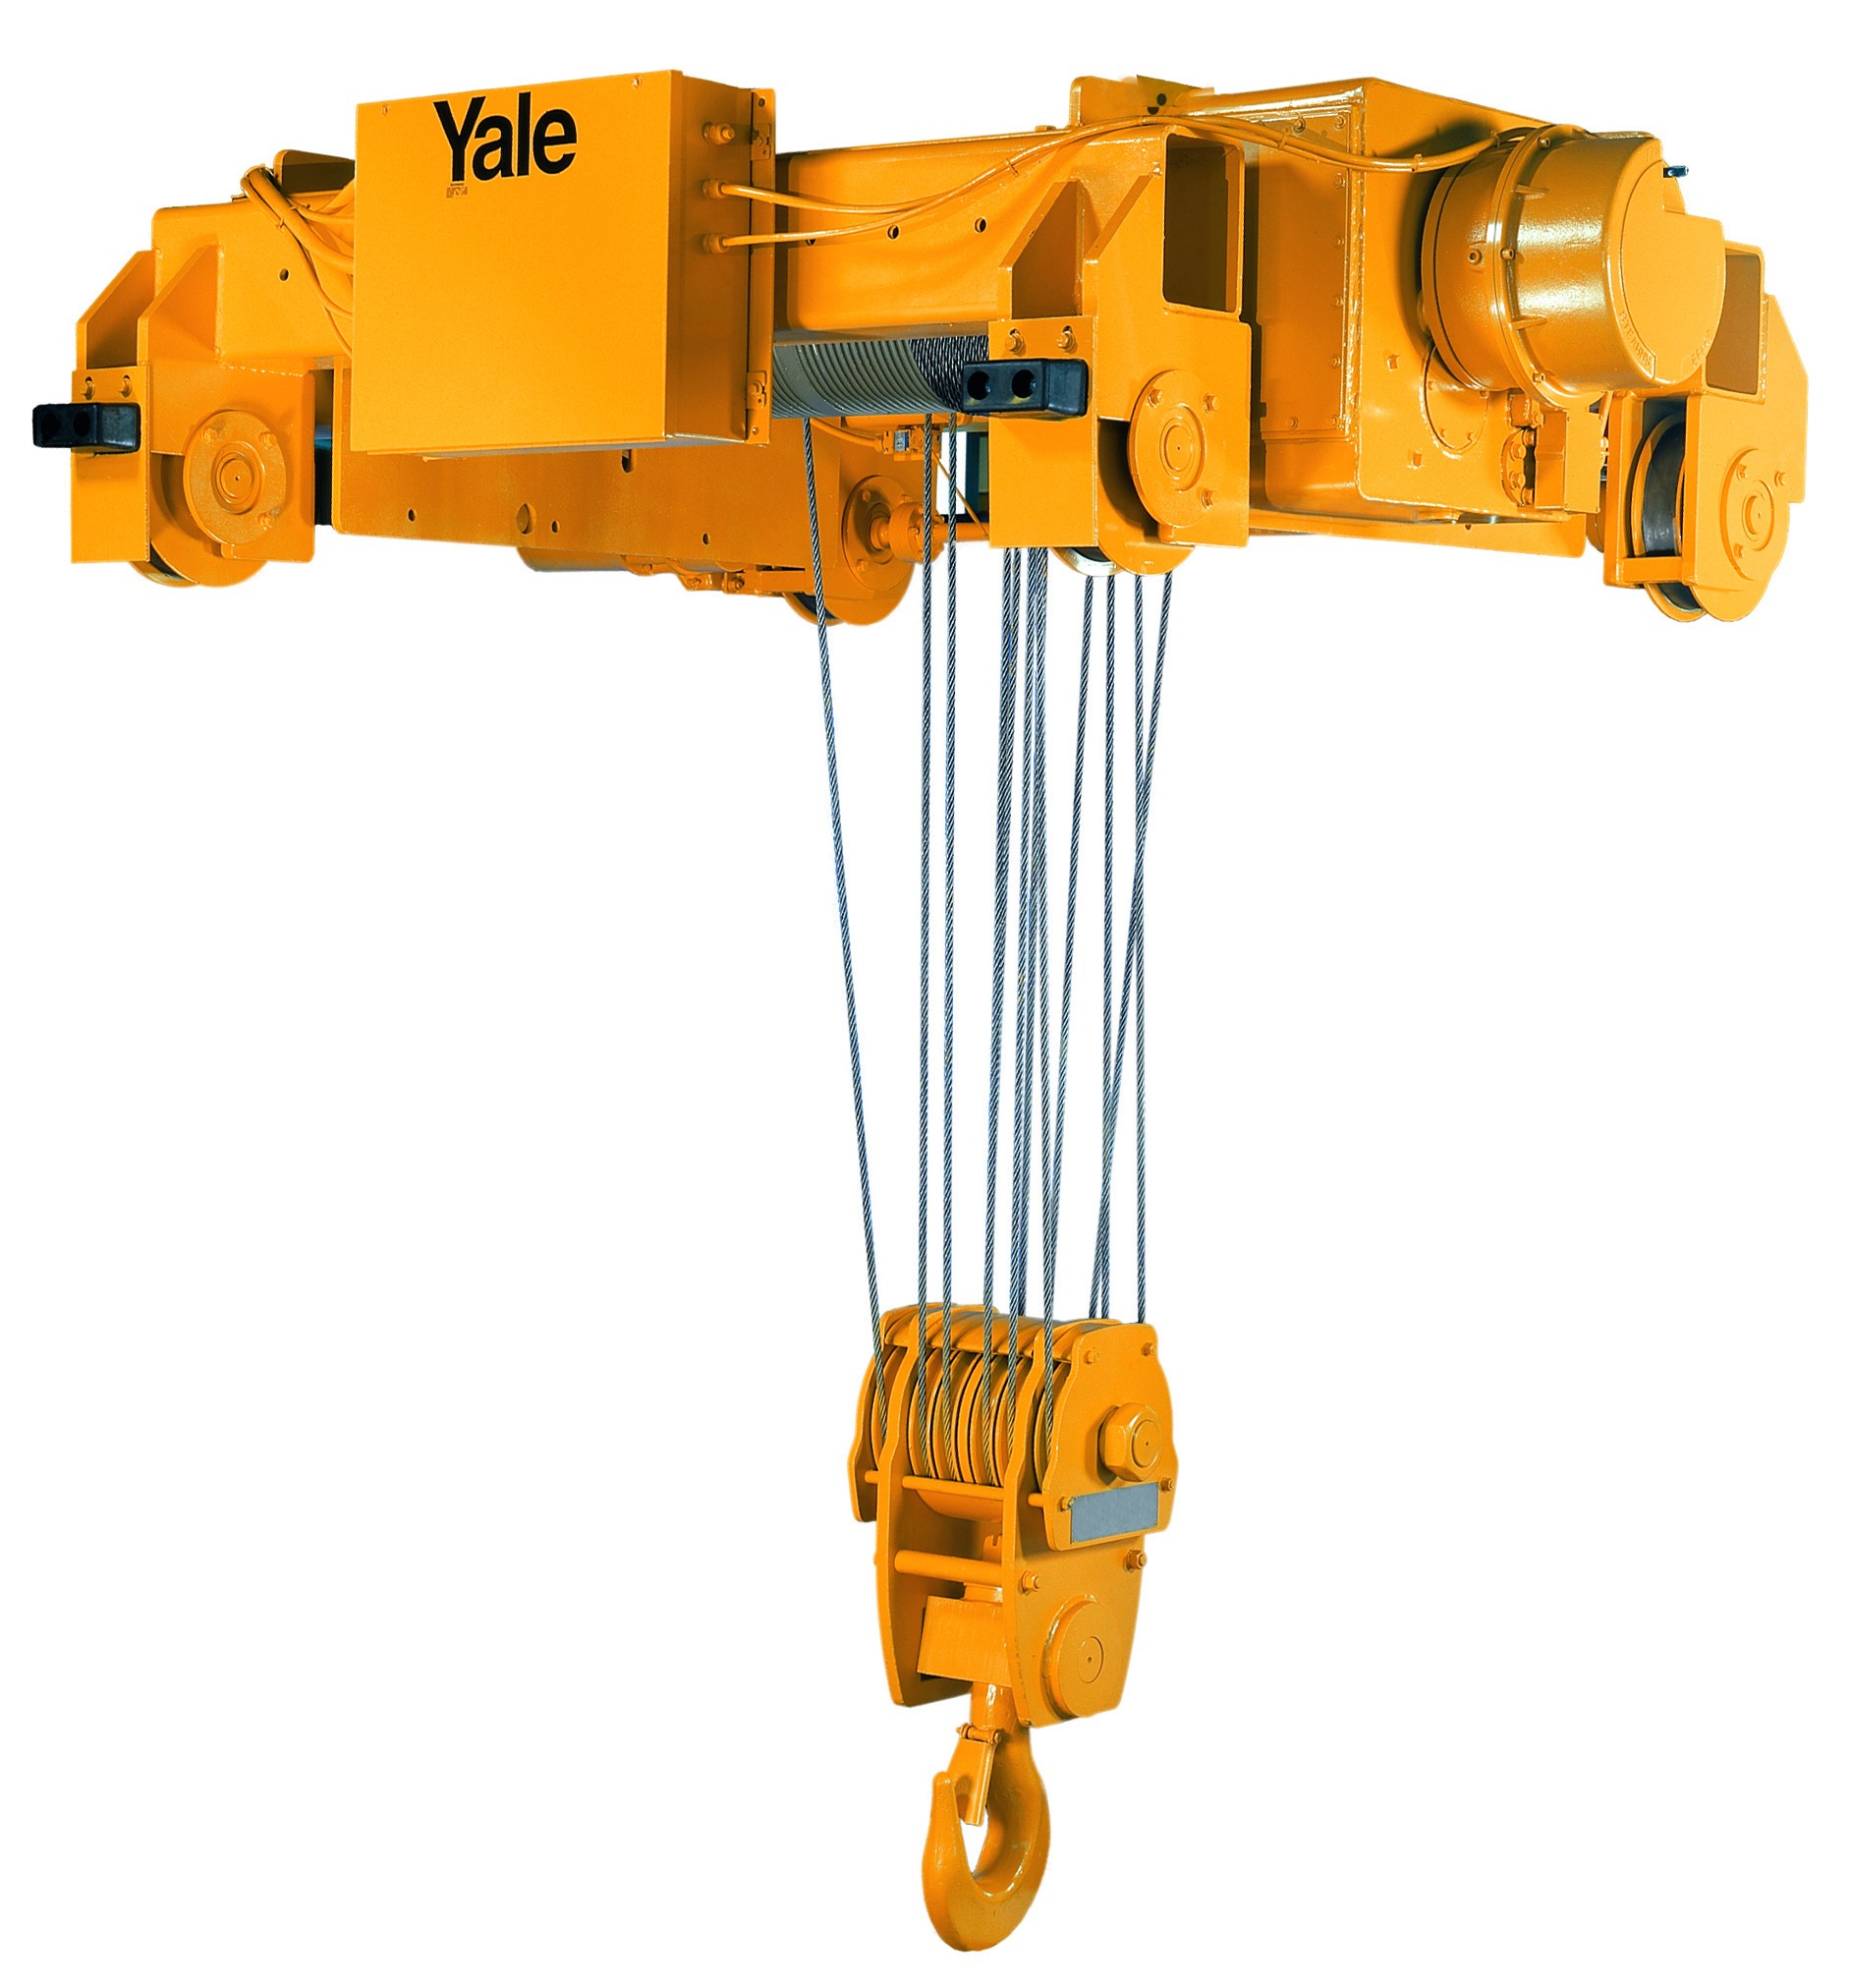 YALE - Cable King 10 Ton Electric Wire Rope Hoist (29fpm & 150' Lift Double Reeve)